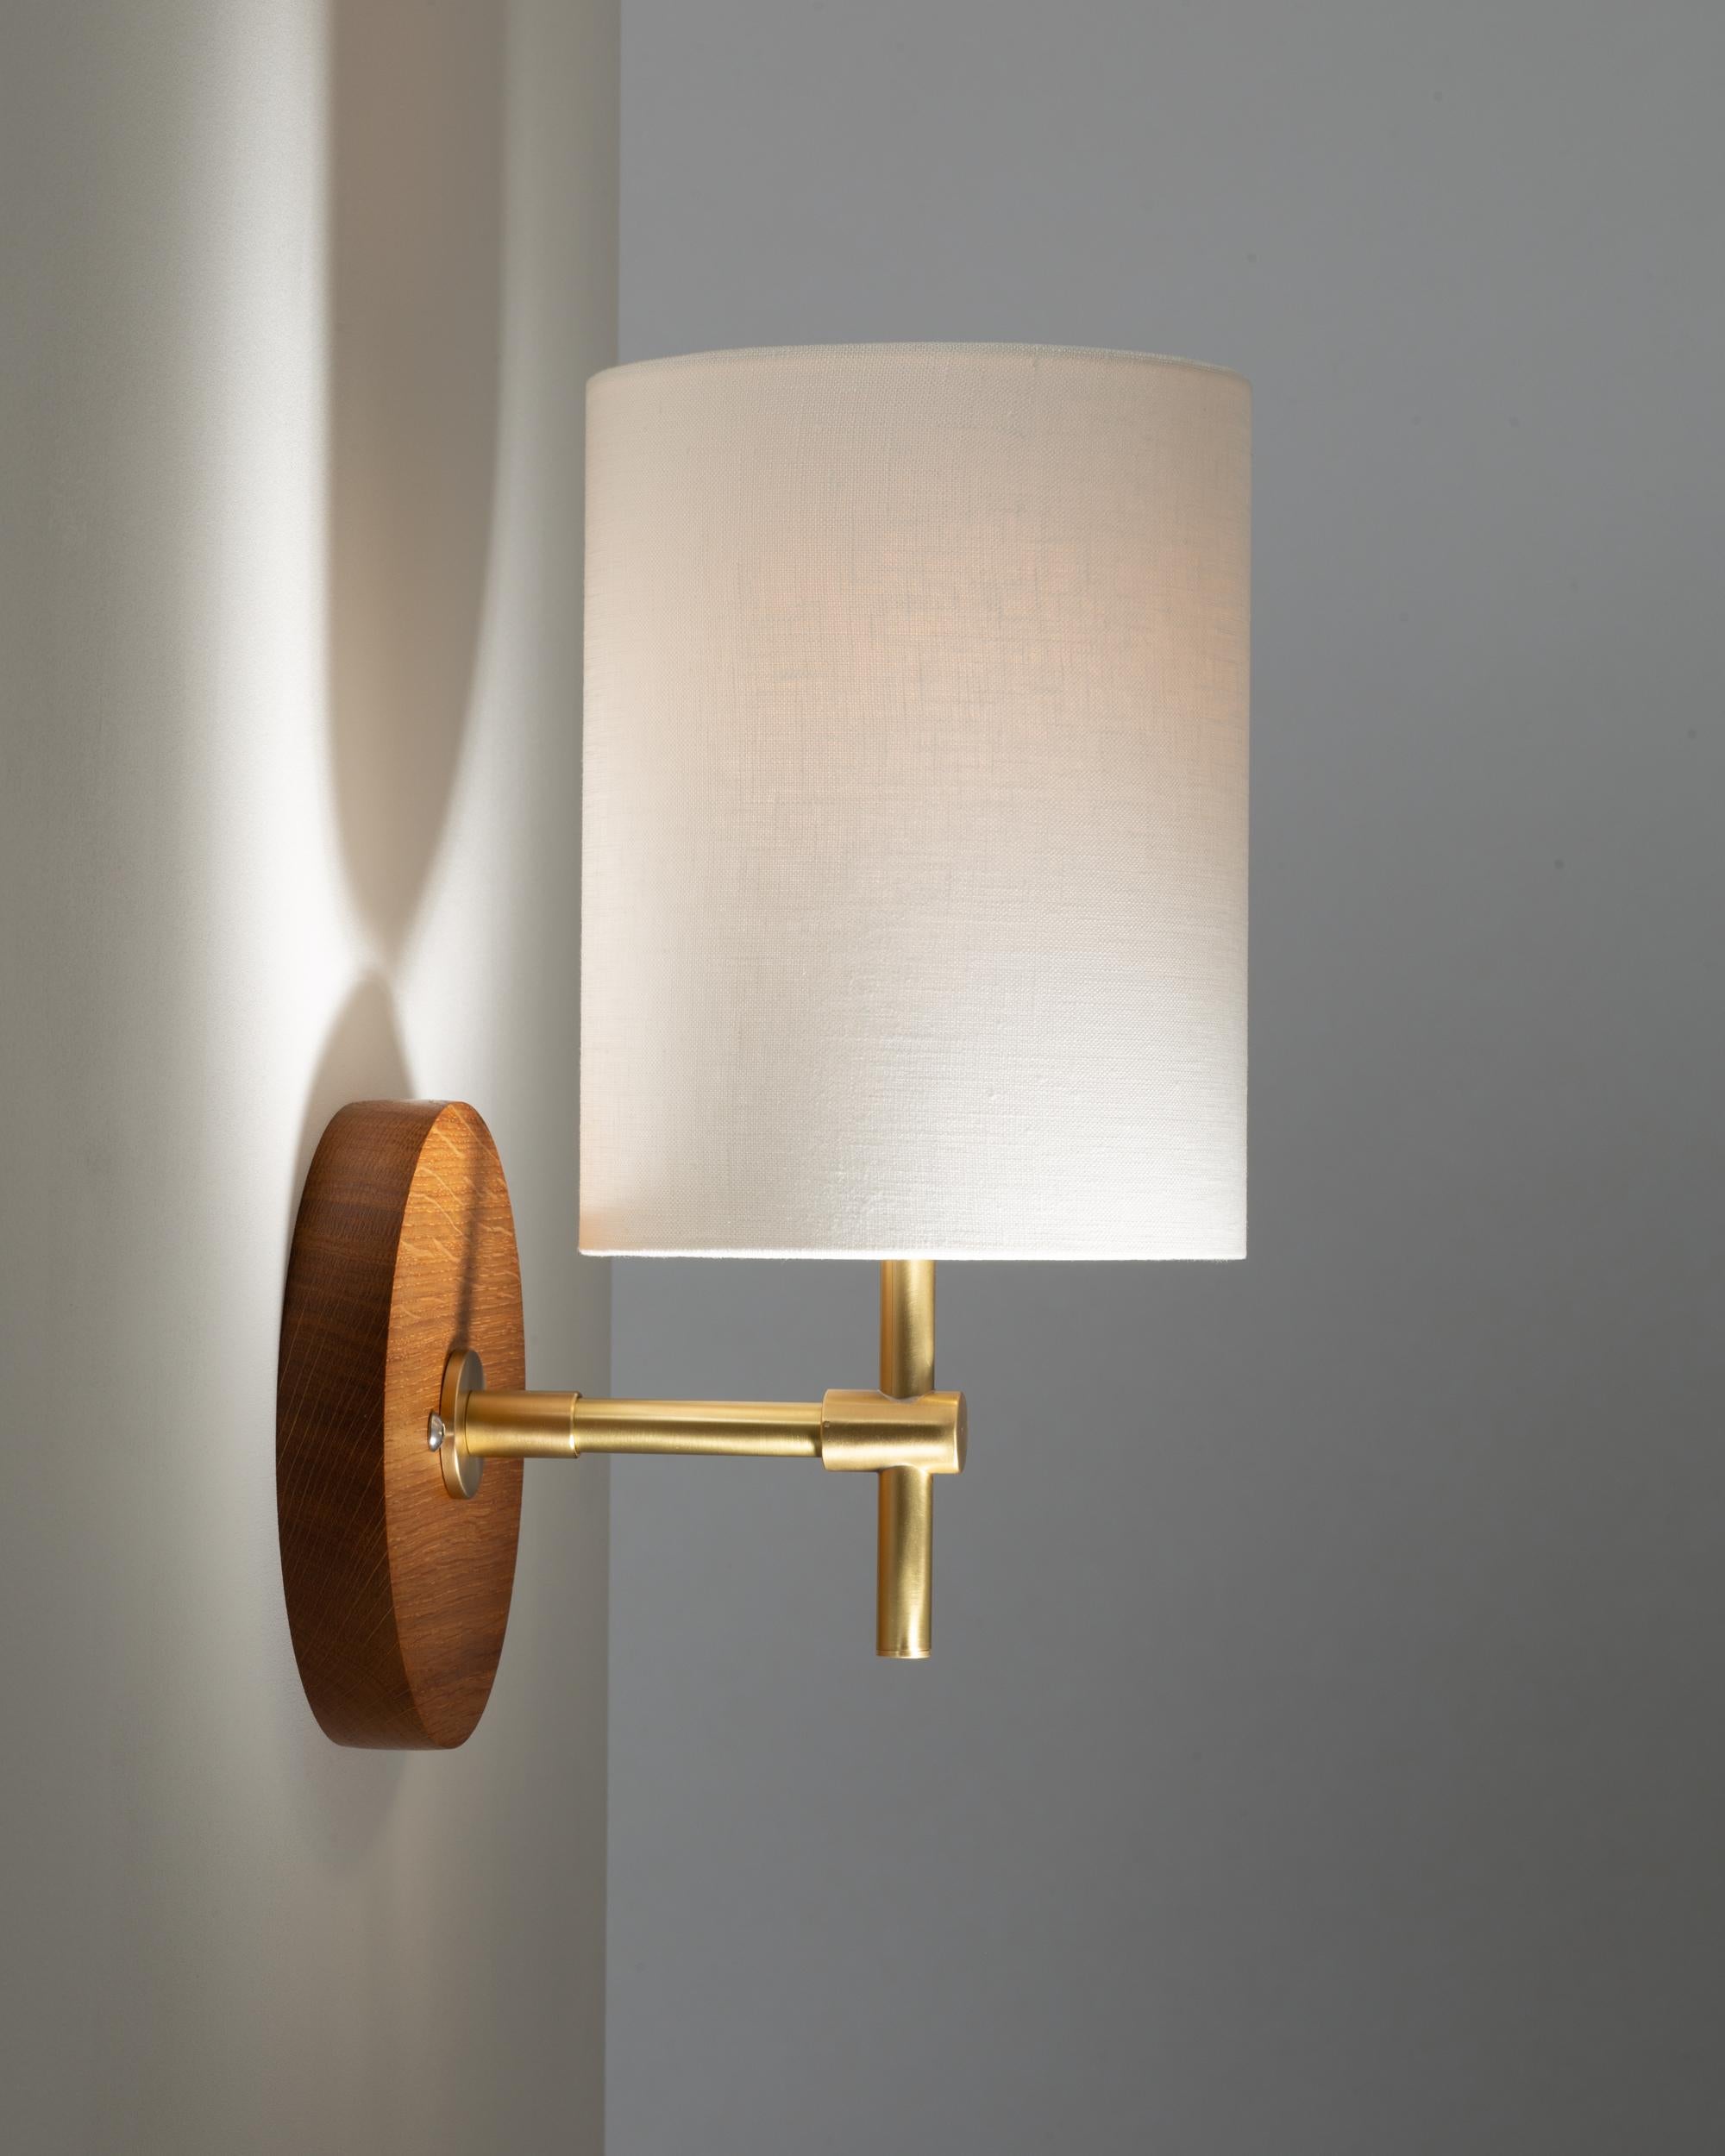 Hand-Crafted Linen Shade Oak Disc Wall Light Sconce by Lights of London For Sale